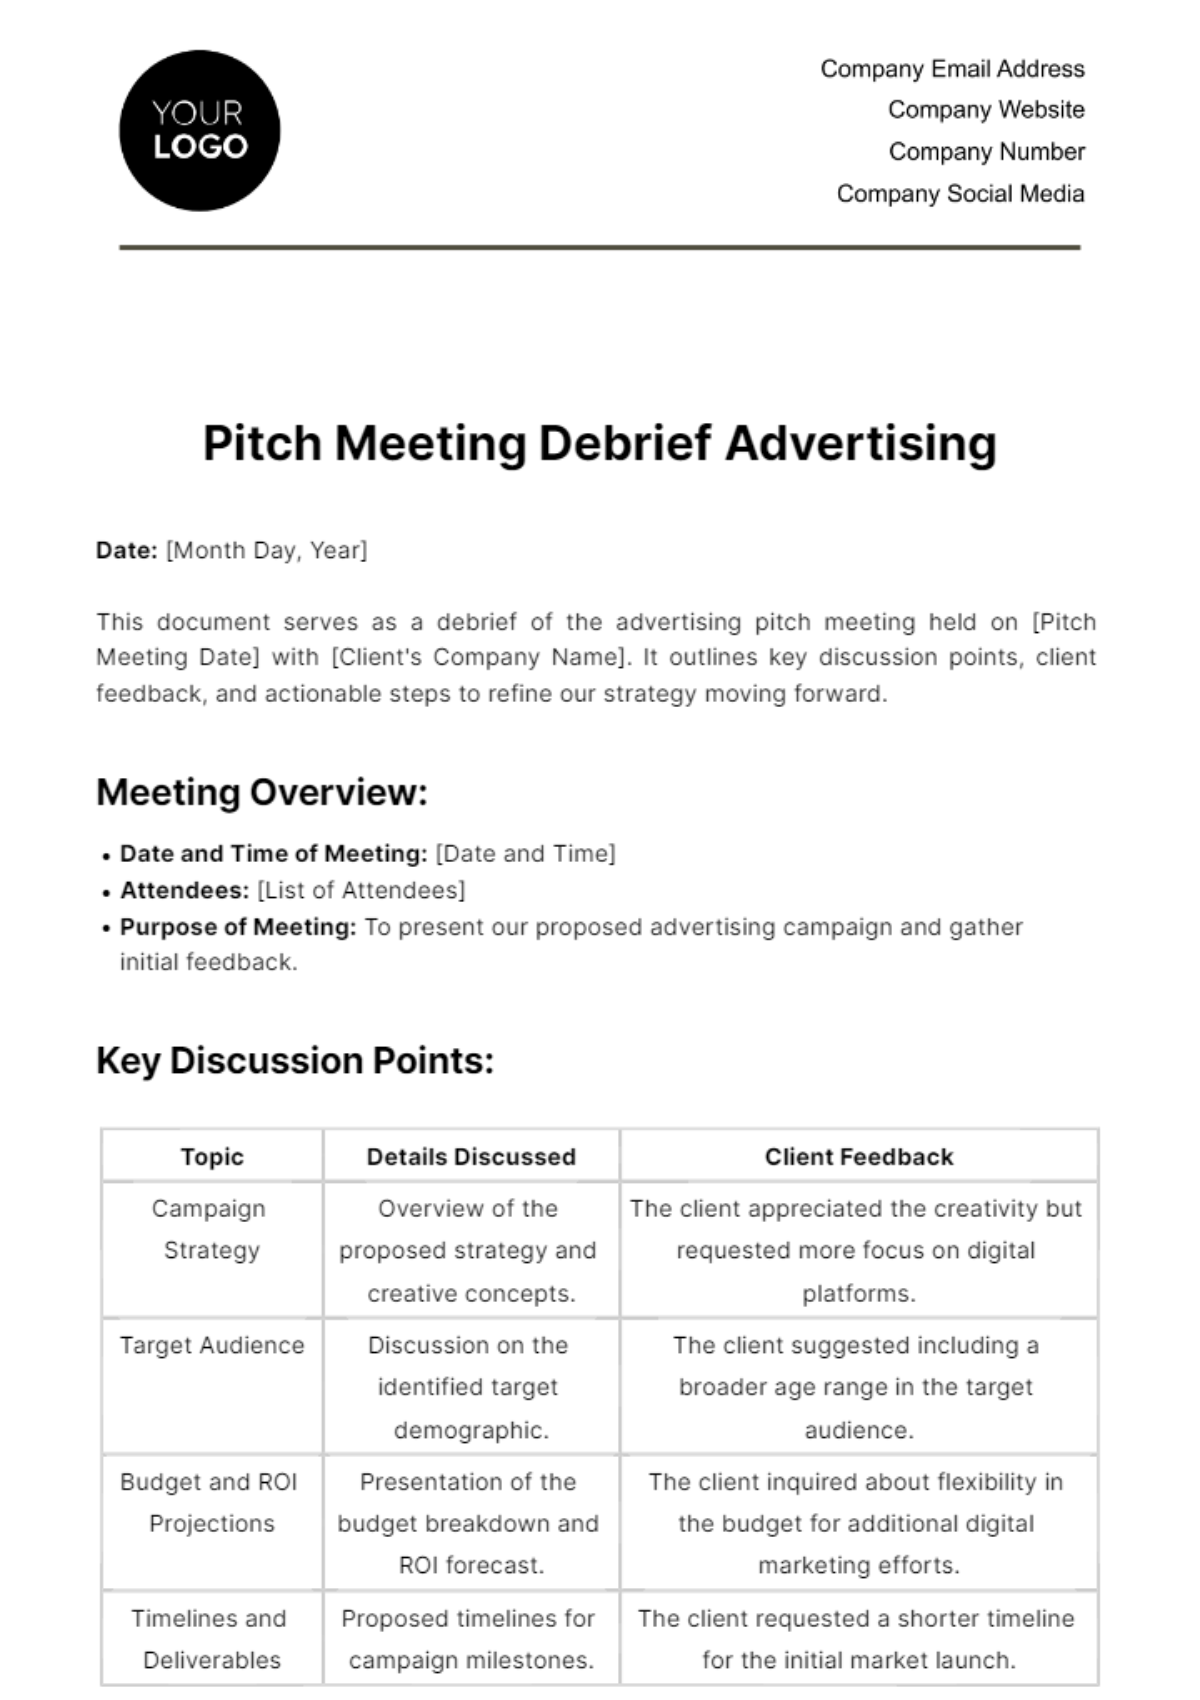 Pitch Meeting Debrief Advertising Template